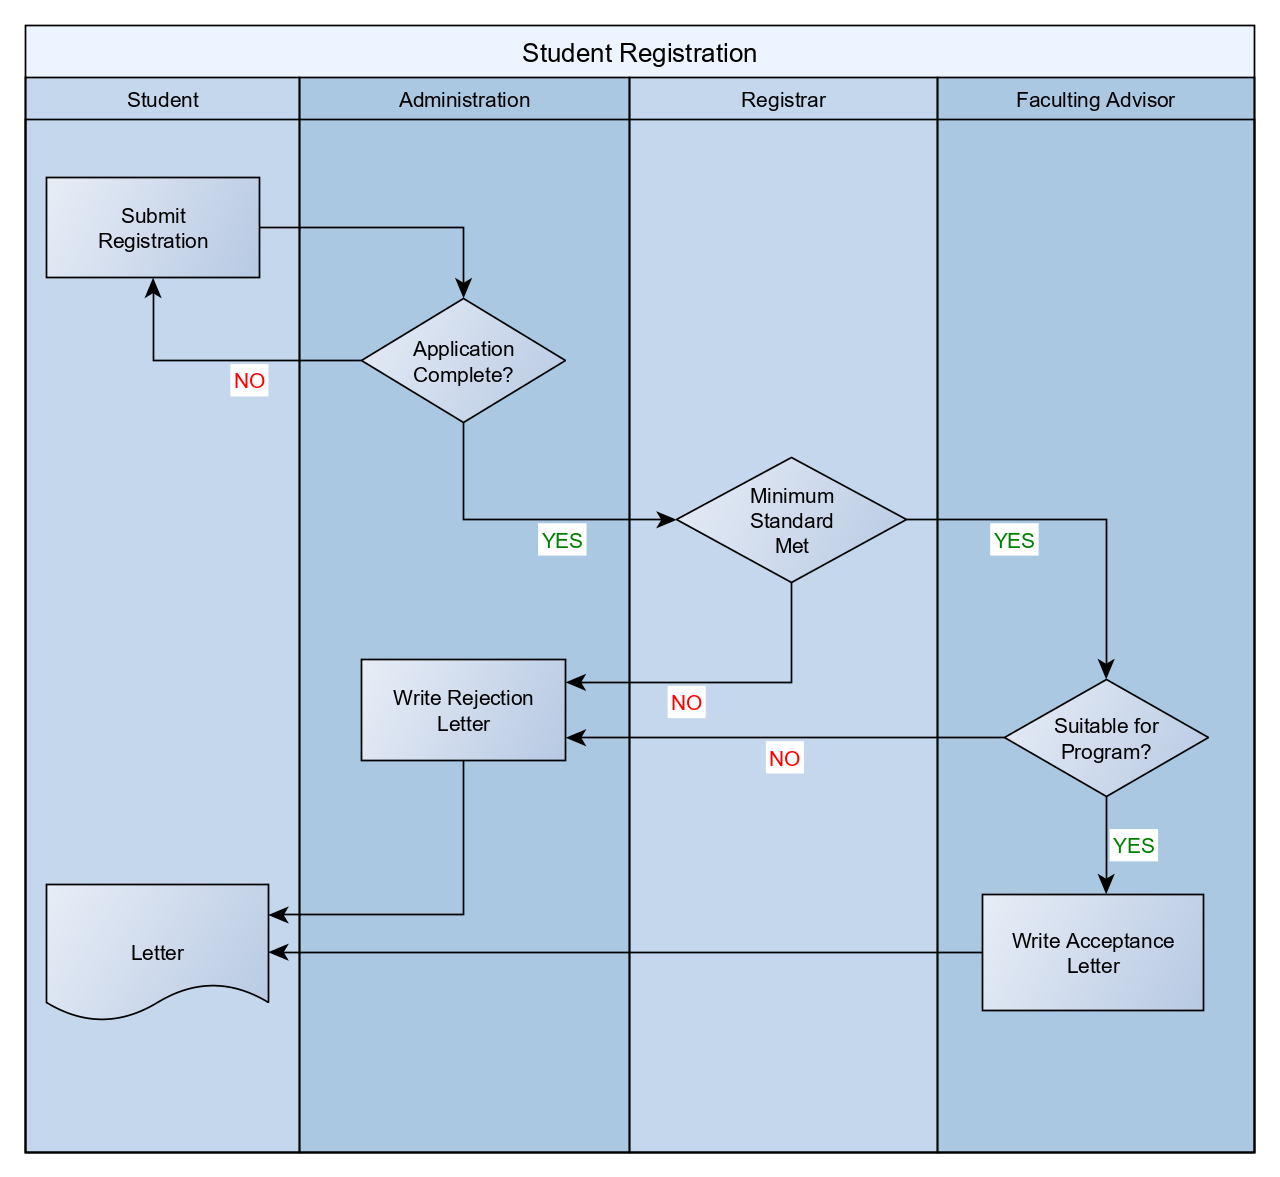 Automatic Label Placement in Diagrams